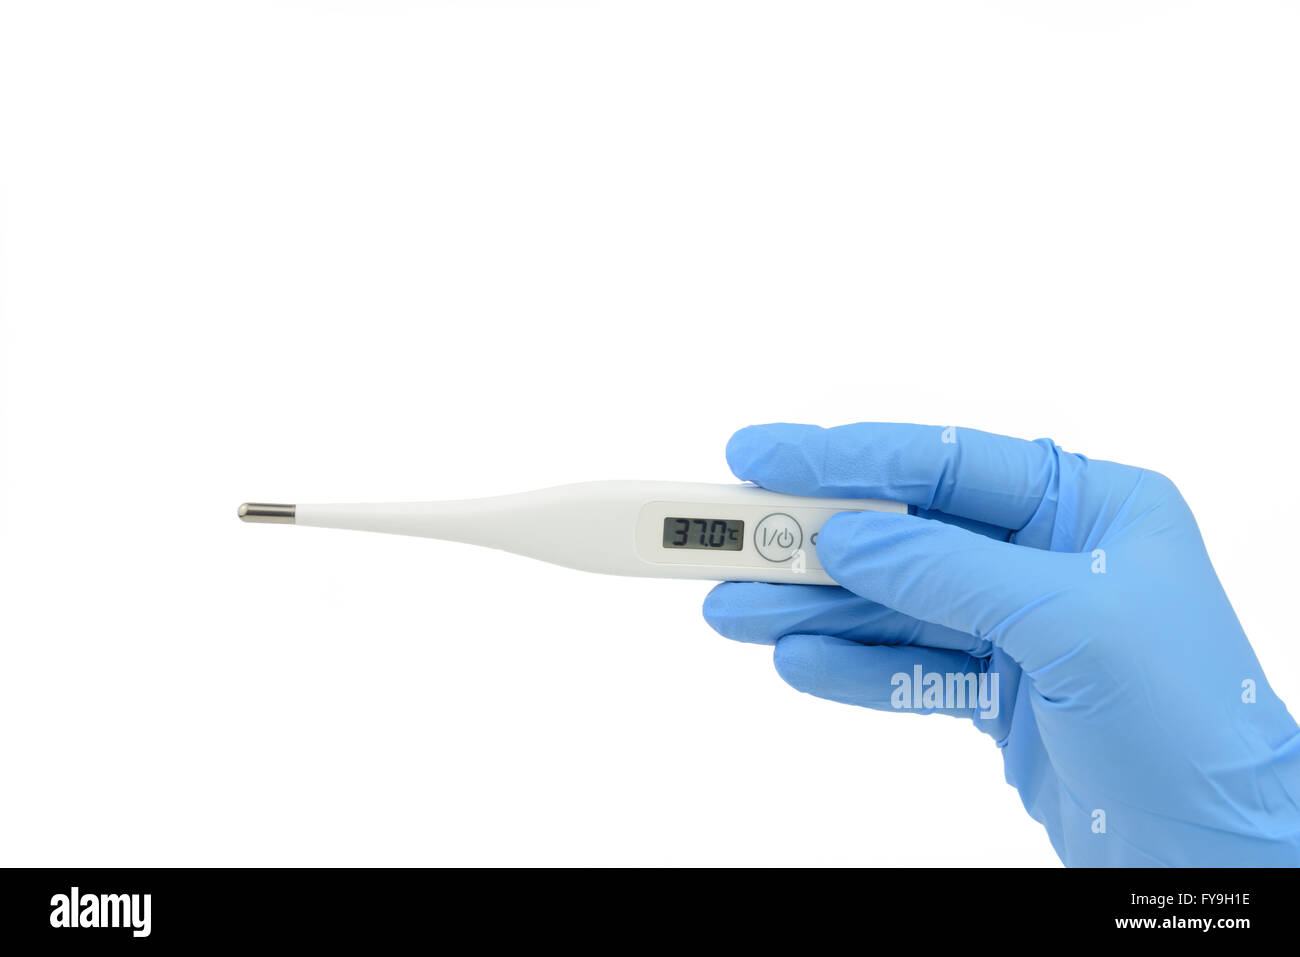 Digital thermometer in hand held, wearing blue nitrile glove, isolated white background Stock Photo